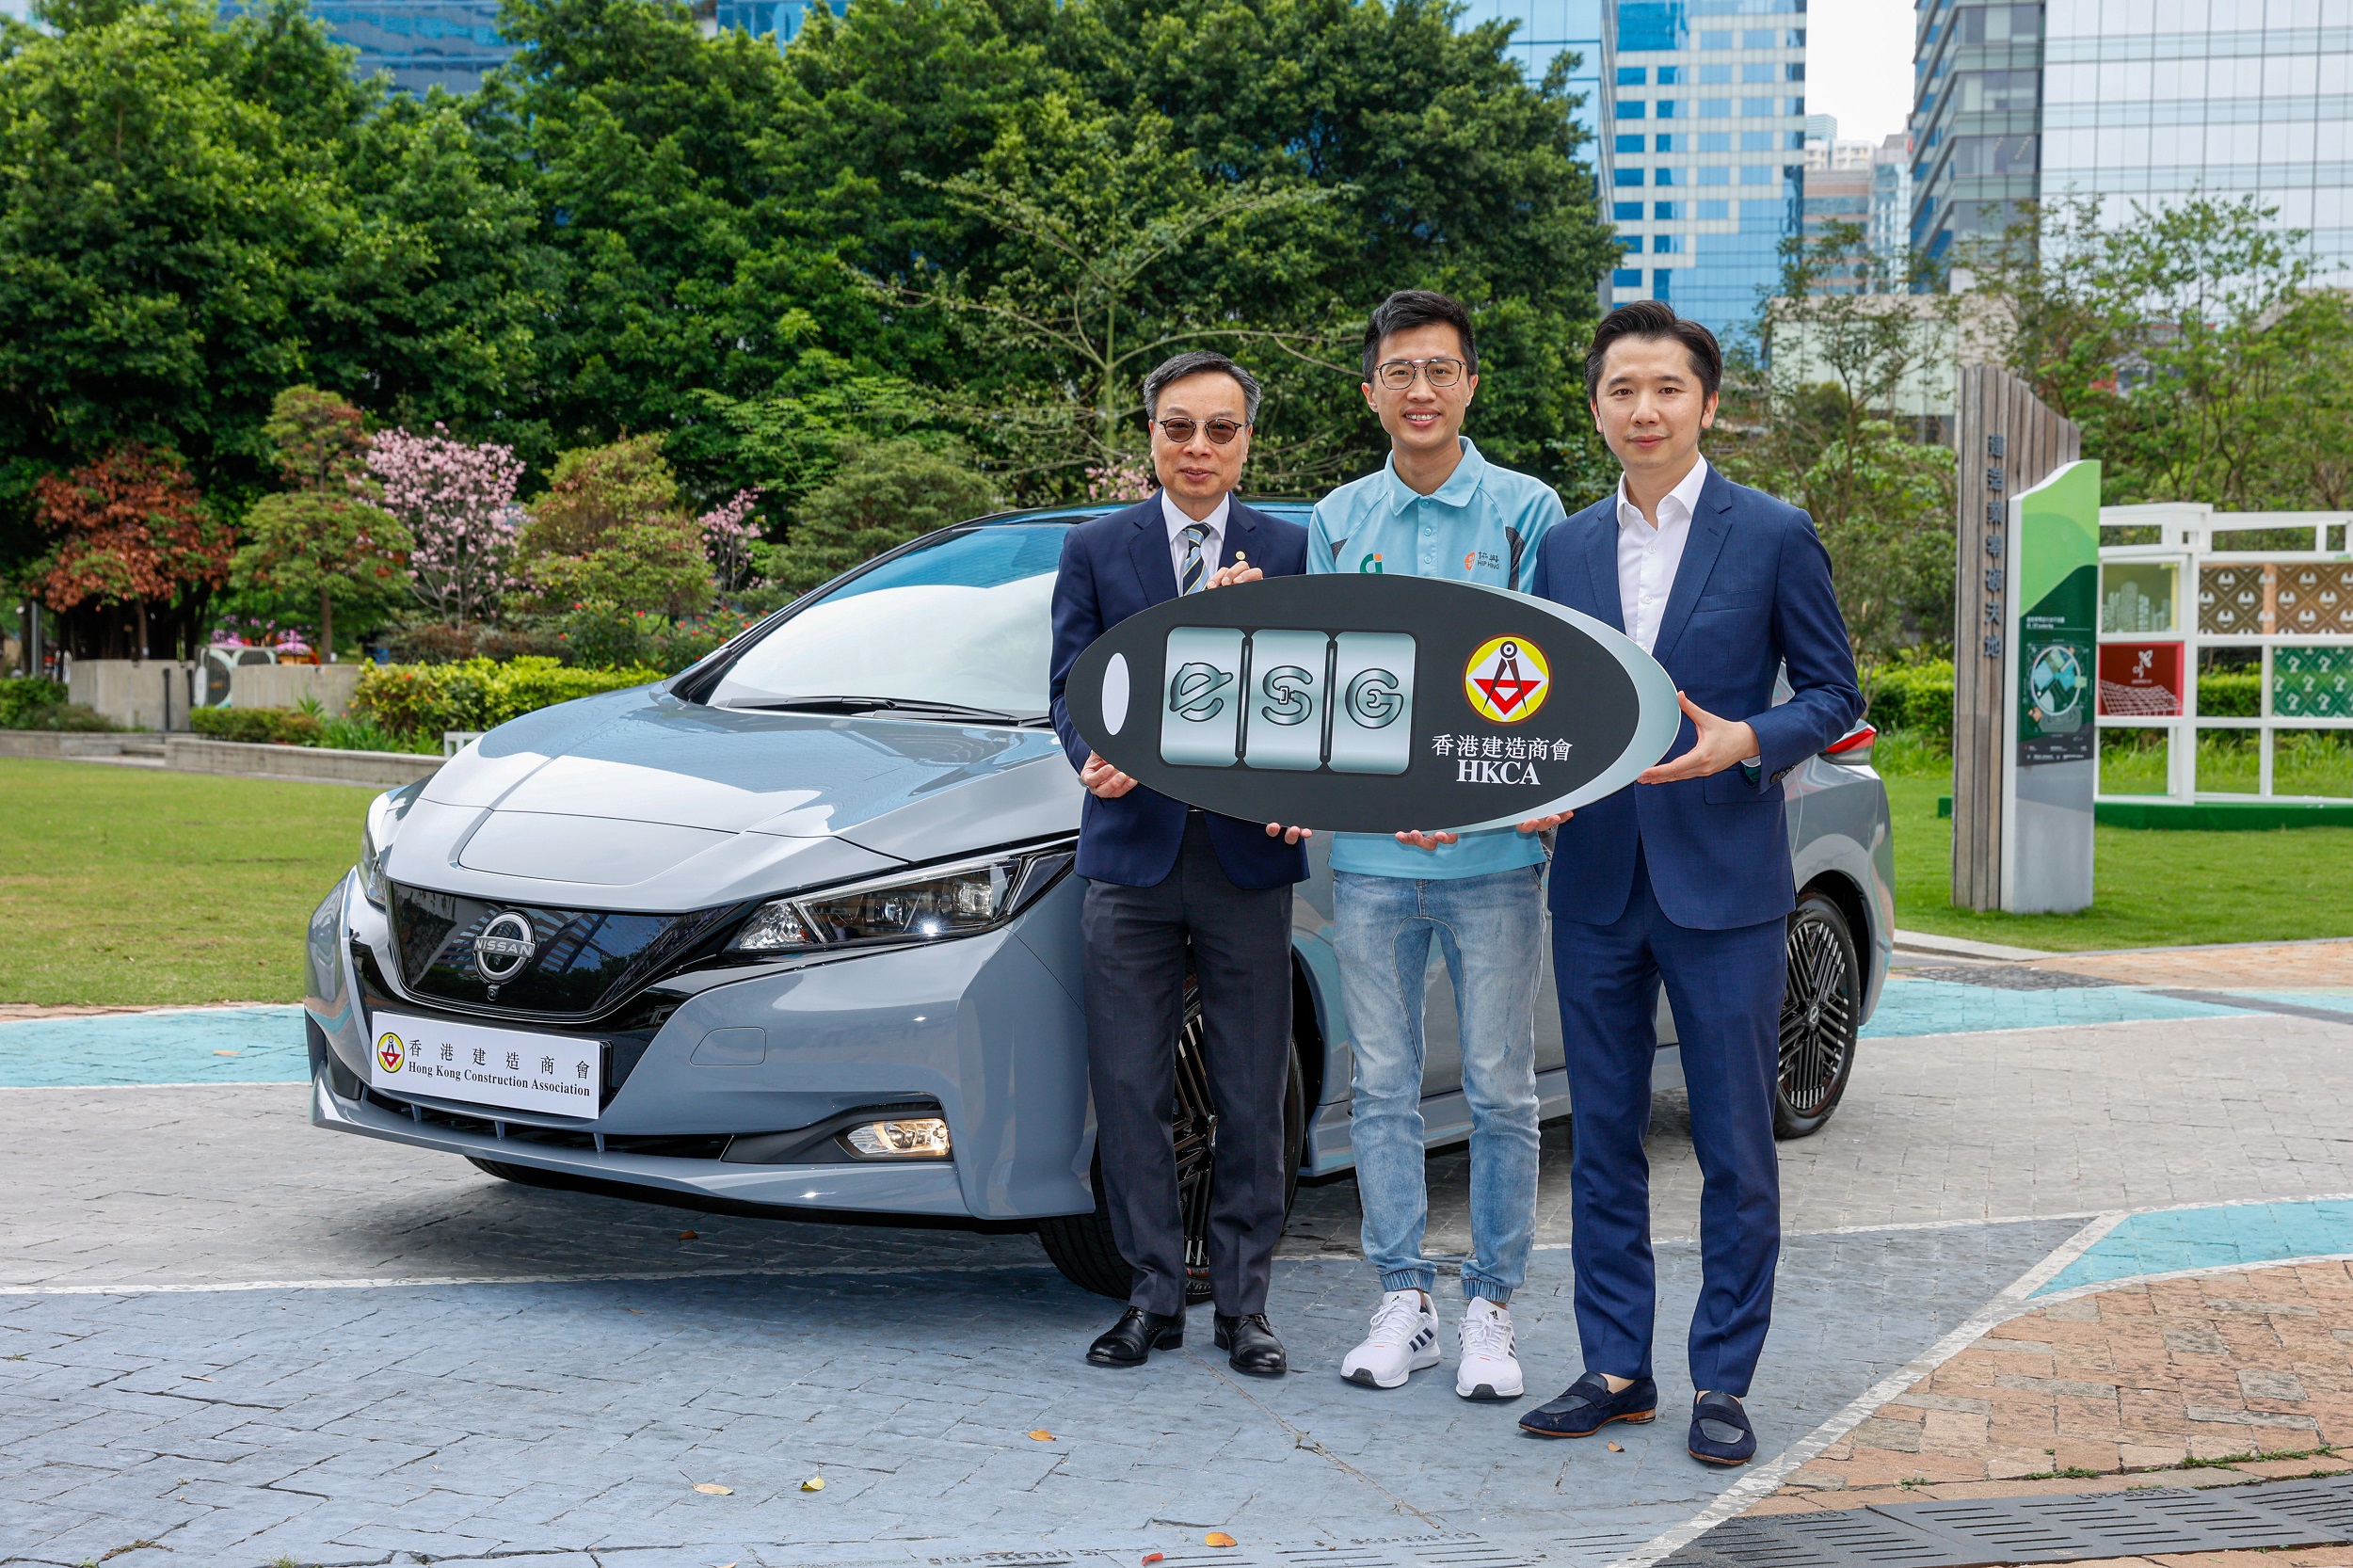 Mr. Eddie Lam, MH, President of HKCA (left), and Mr. Rex Wong, JP, First Vice President of HKCA (right), presented an electric car as the grand prize to the winner of the Grand Lucky Draw from the 